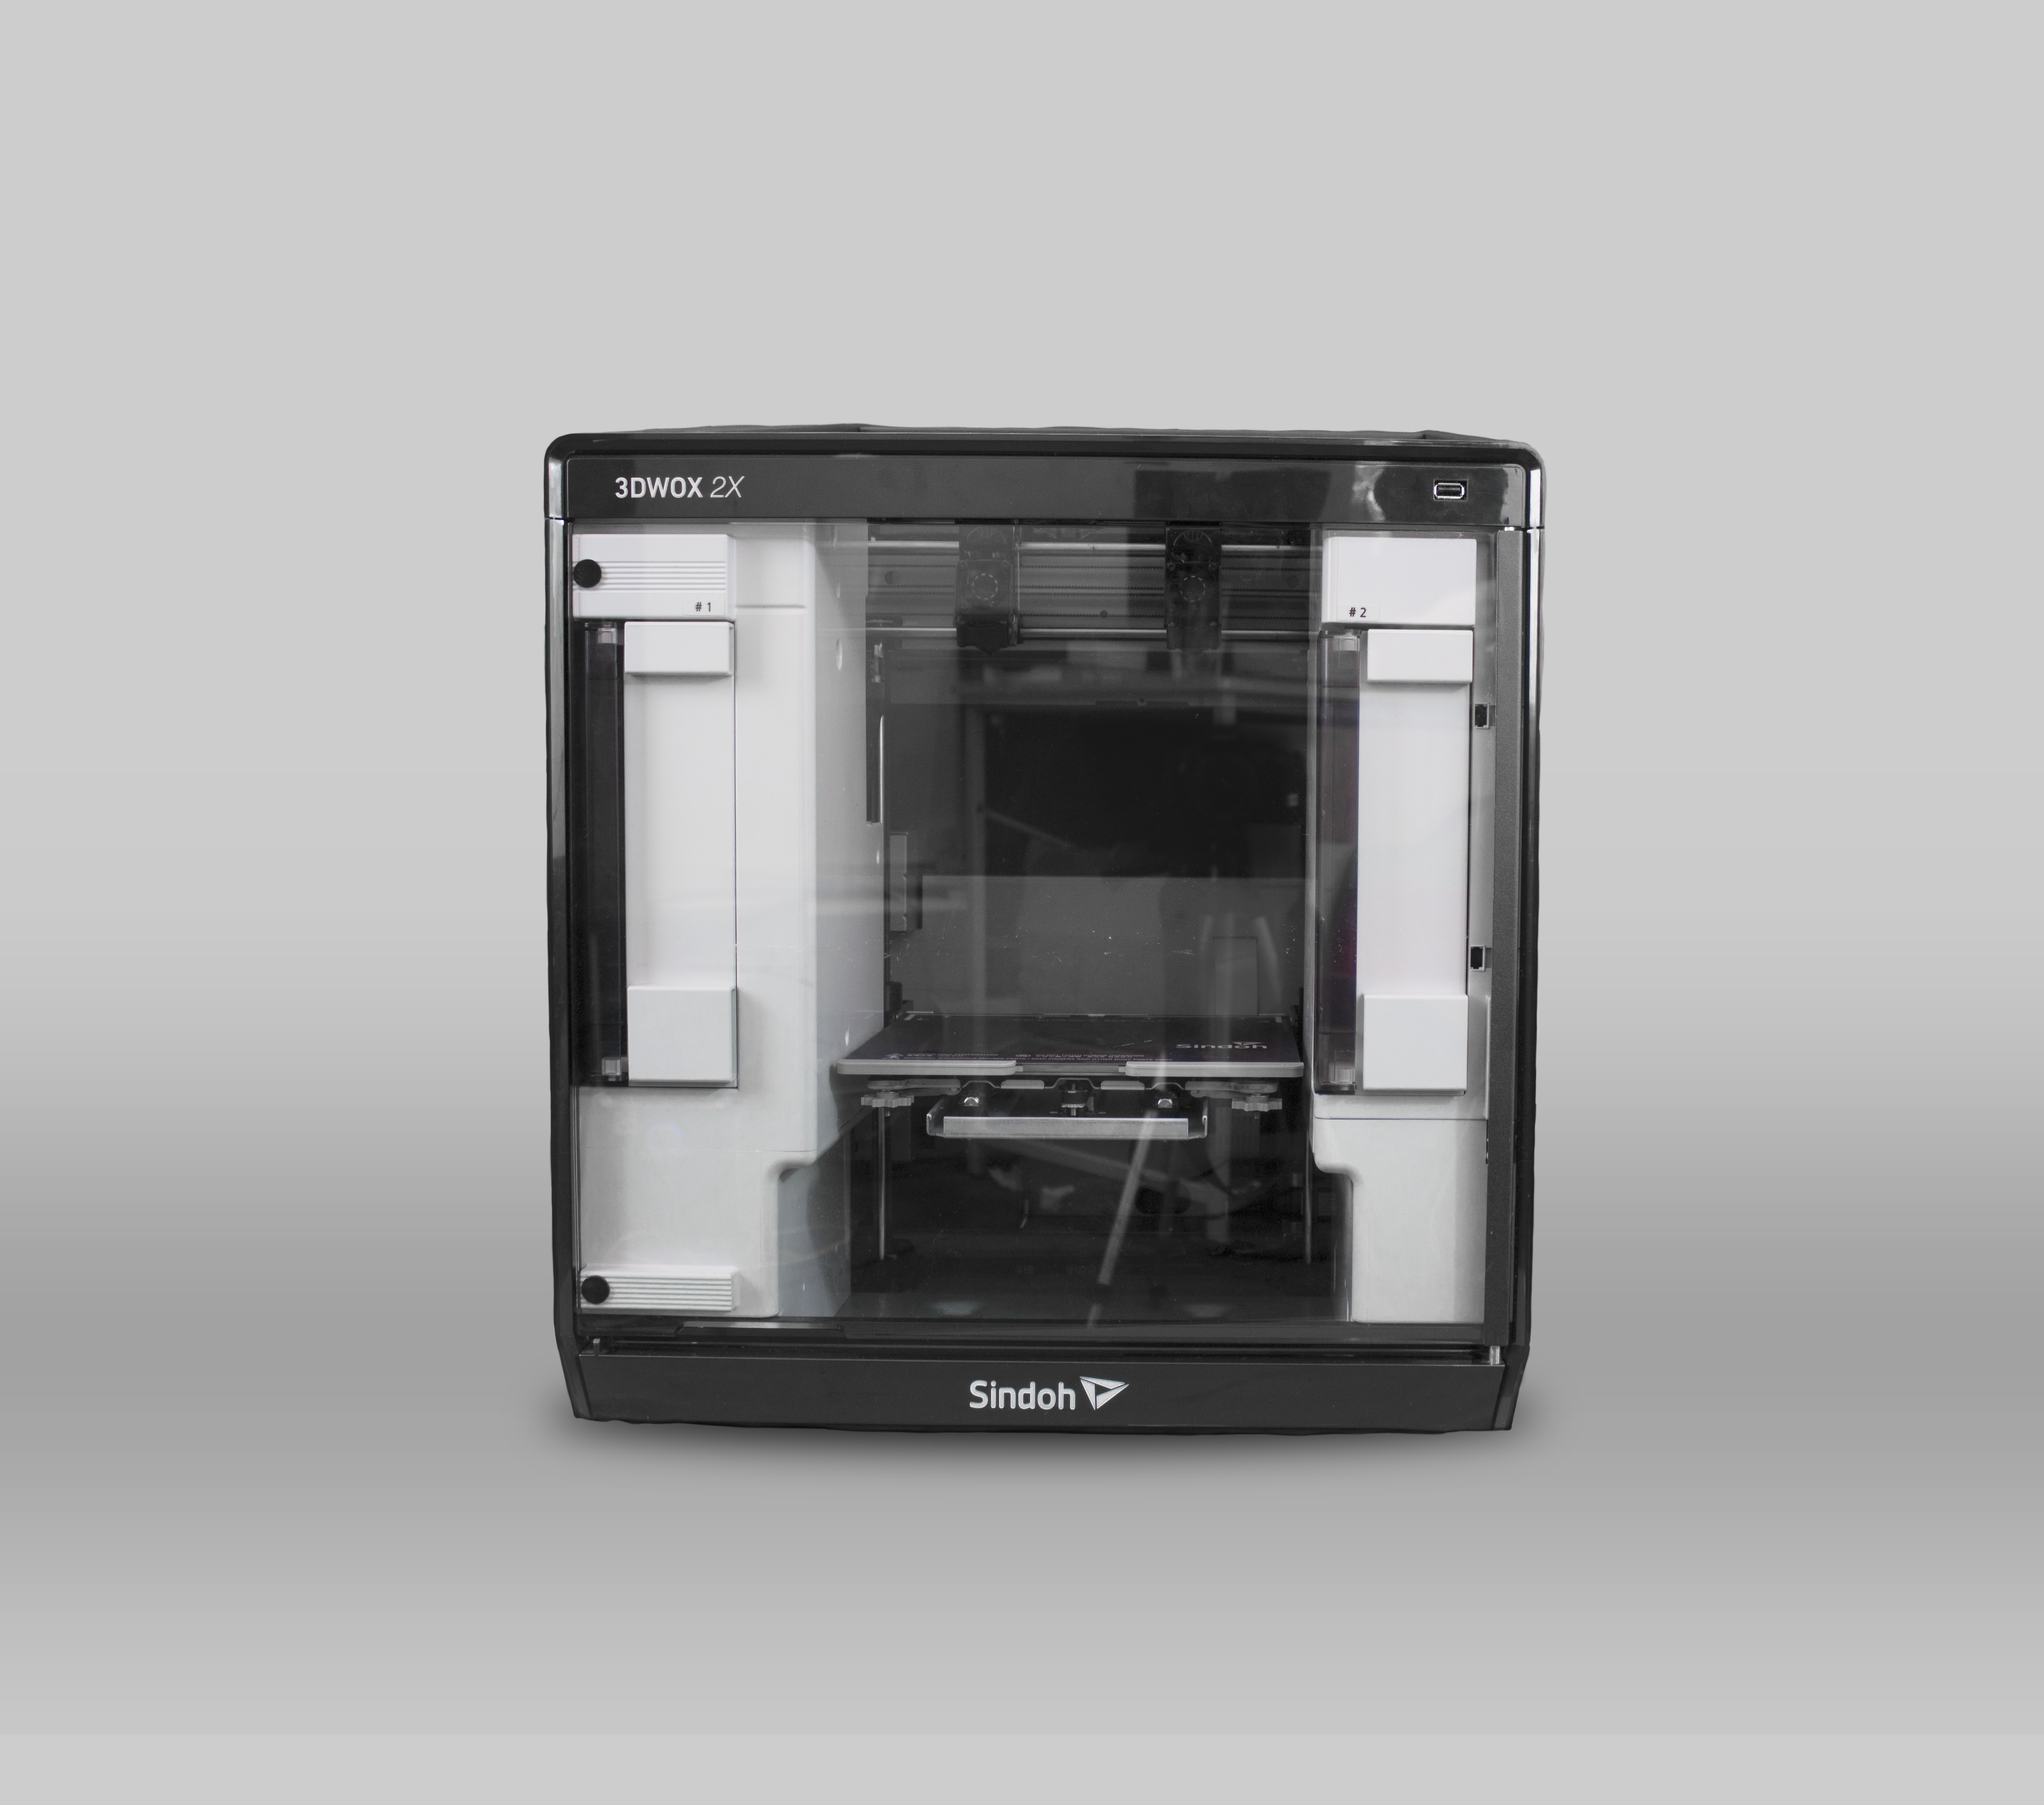 Let at forstå entreprenør ambulance REVIEW: The Sindoh 3DWOX 2X, an accurate, user-friendly dual extrusion 3D  printer - 3D Printing Industry